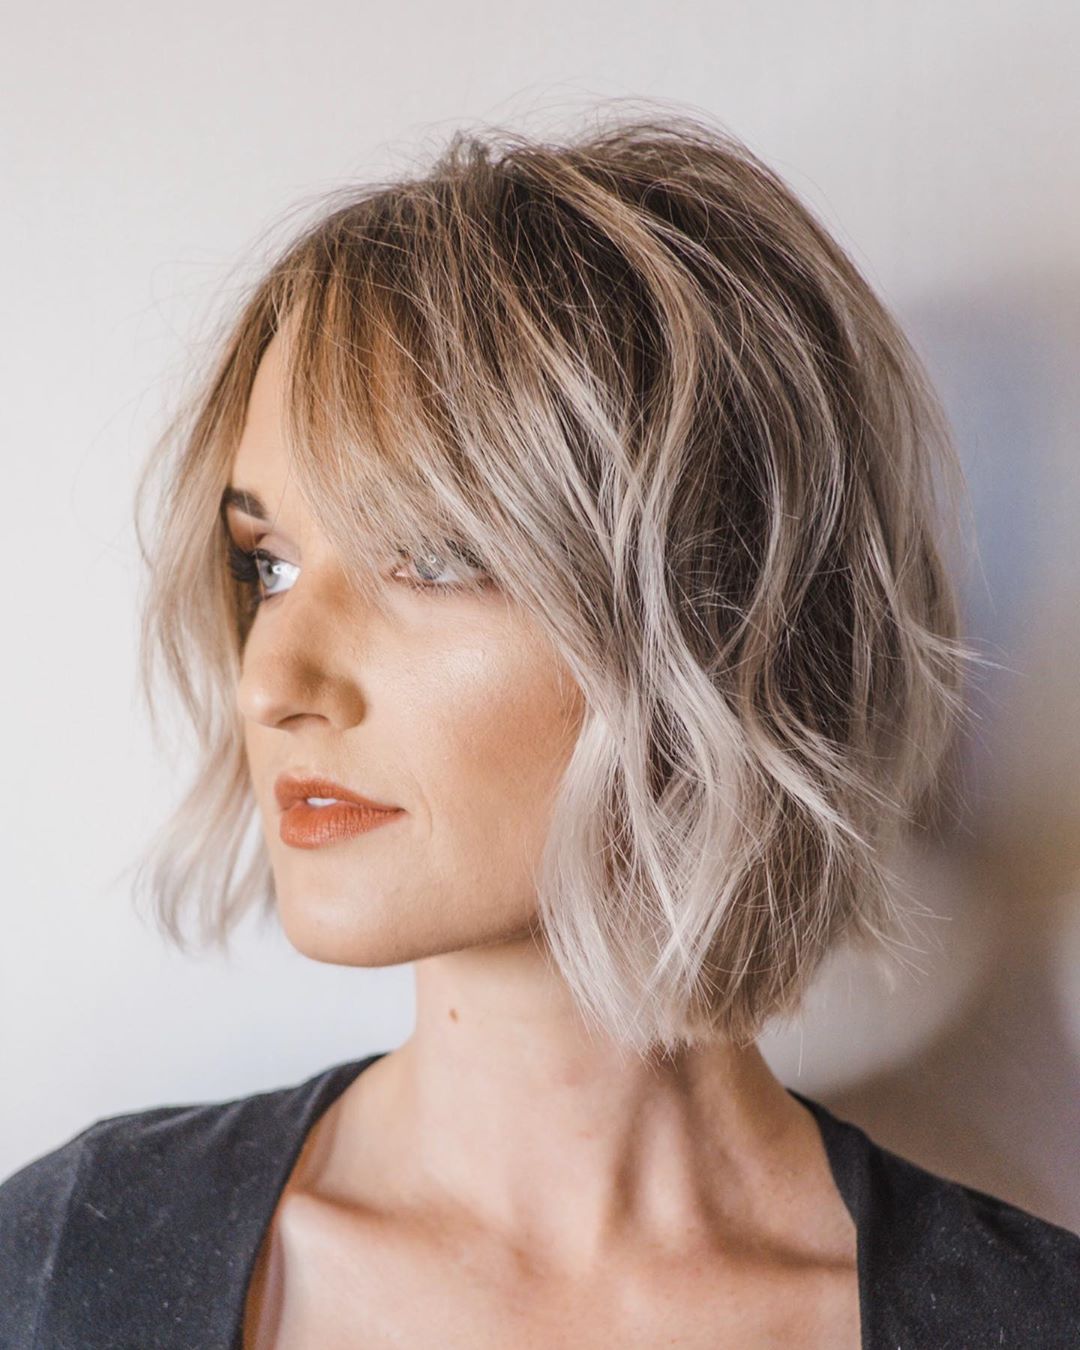 Easy Bob Haircut Carefree & Casual Trends - Women Short Hairstyle Ideas